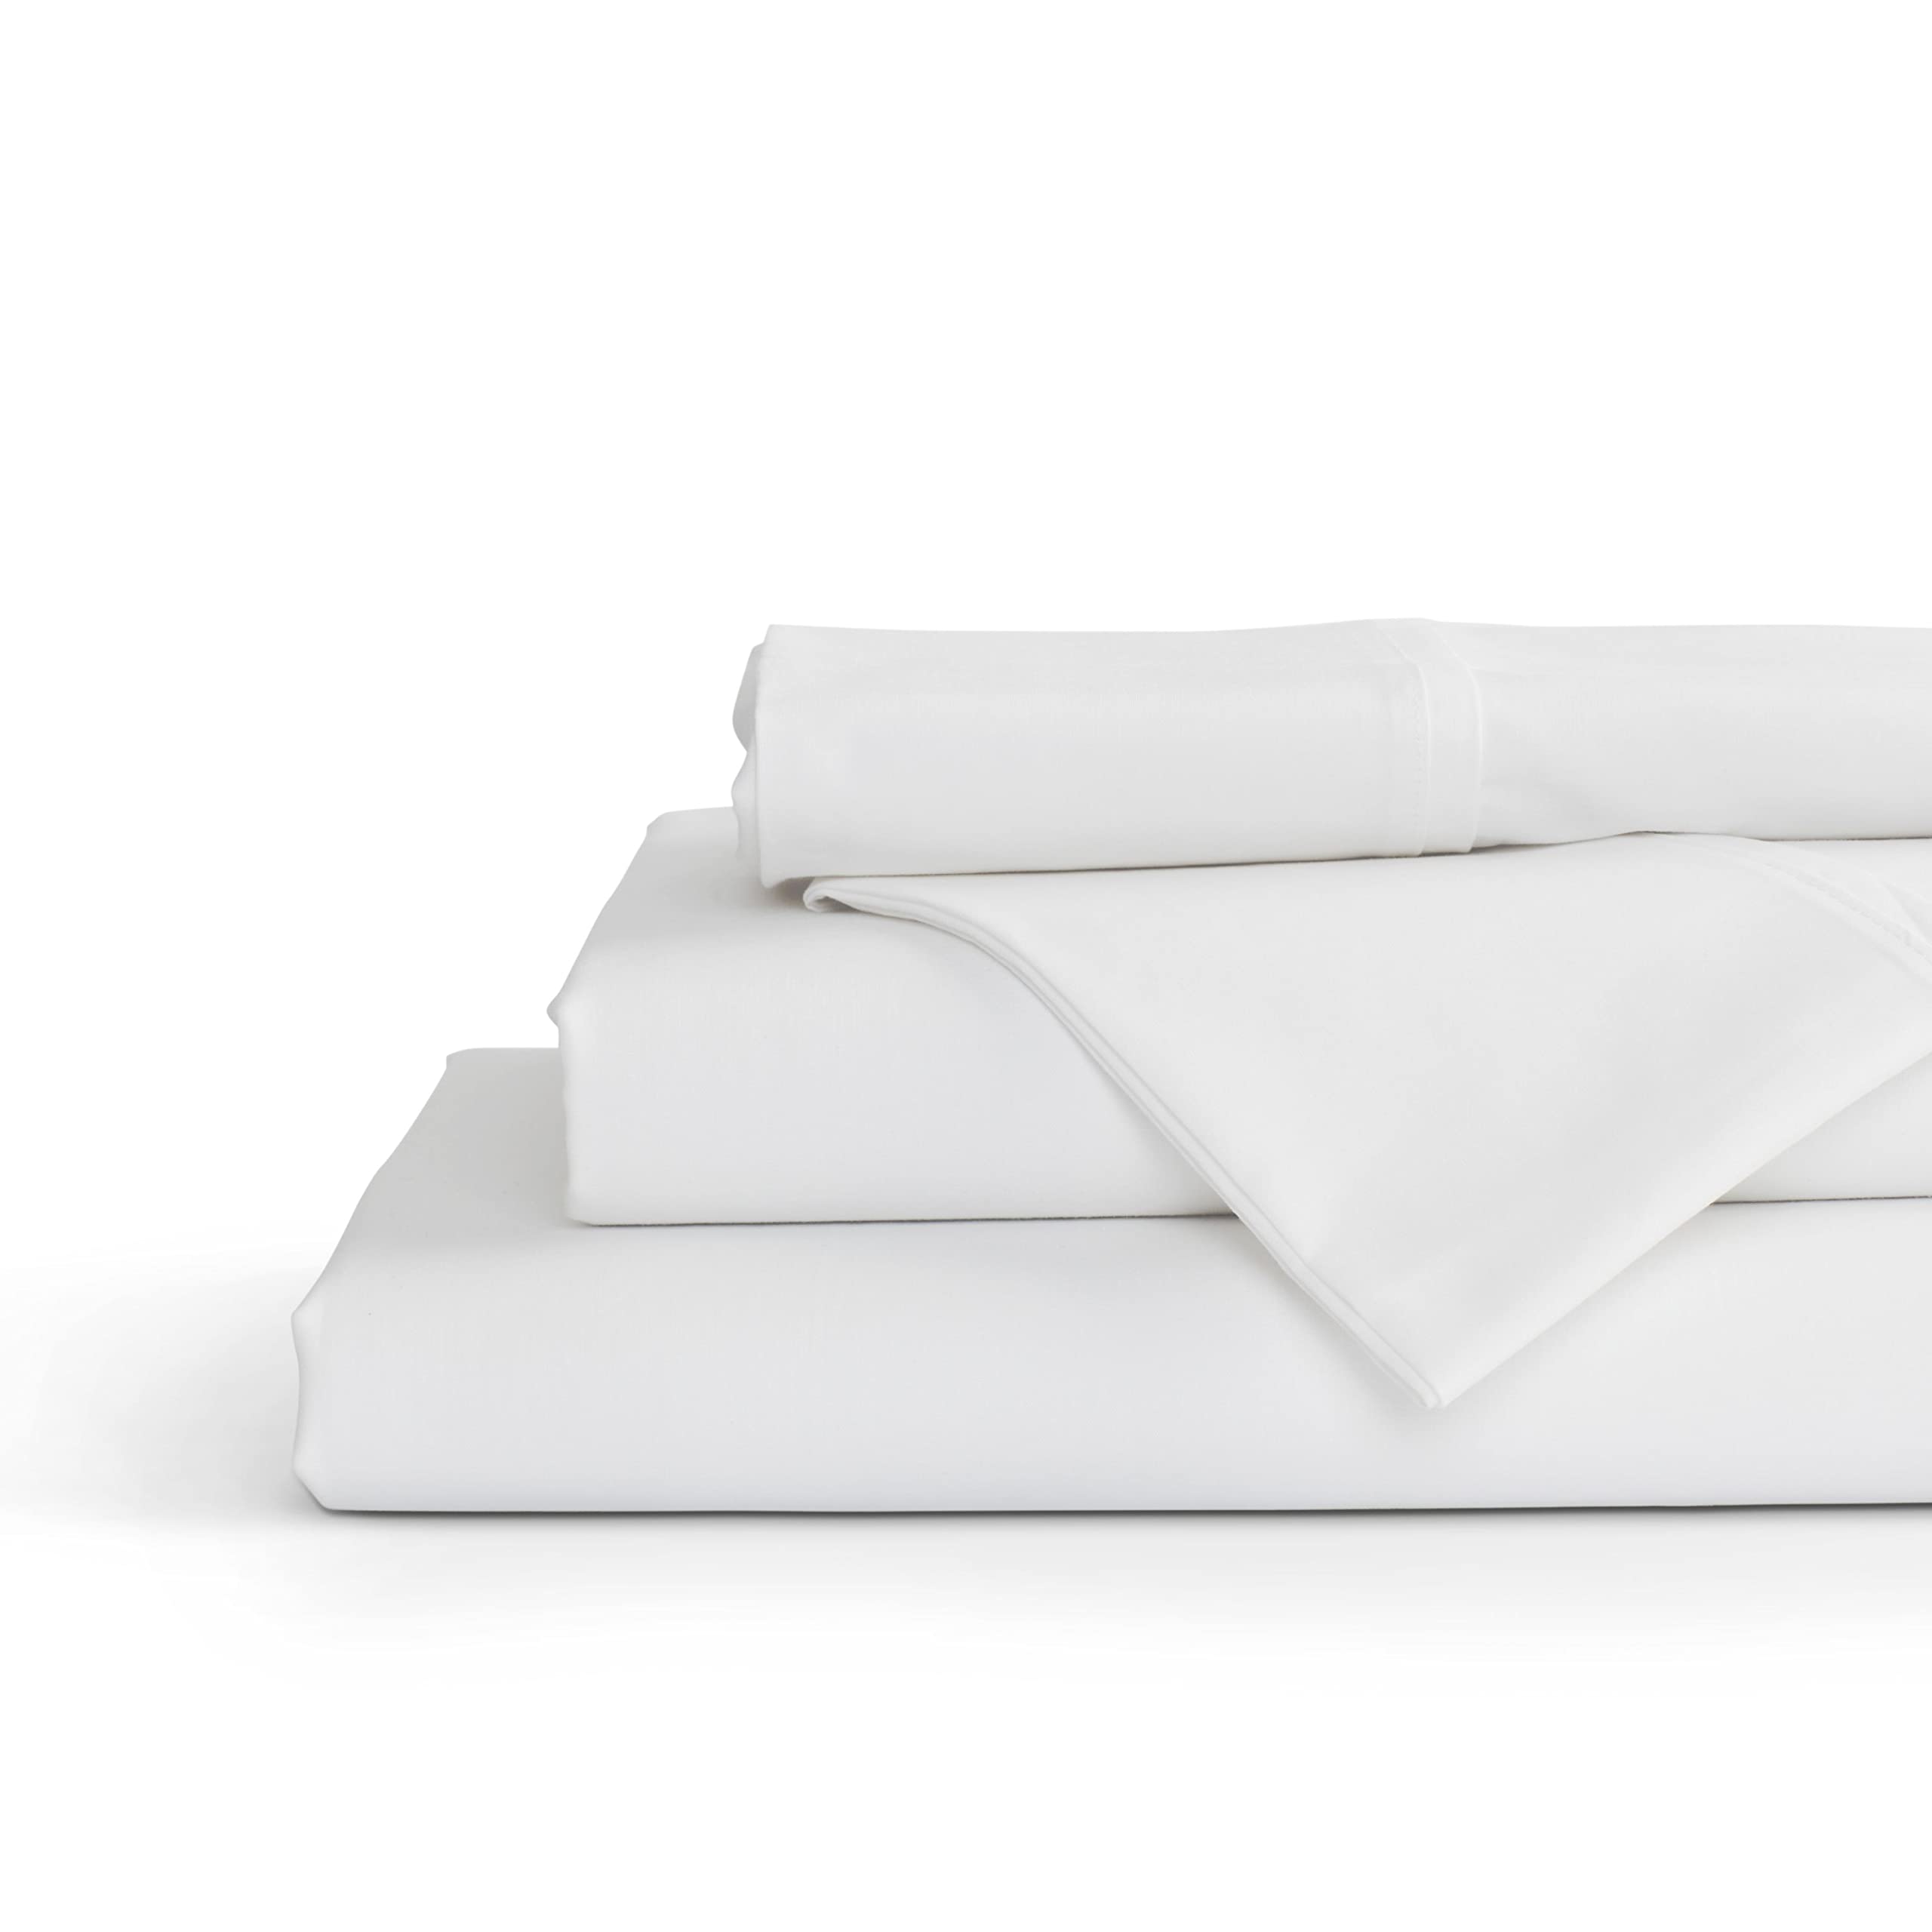 Book Cover 100% Cotton Percale Sheets Twin Size, White, Deep Pocket, 3 Pieces Sheet Set - 1 Flat, 1 Deep Pocket Fitted Sheet and 1 Pillowcase, Crisp Cool and Strong Bed Linen Twin Solid Sheet Set White